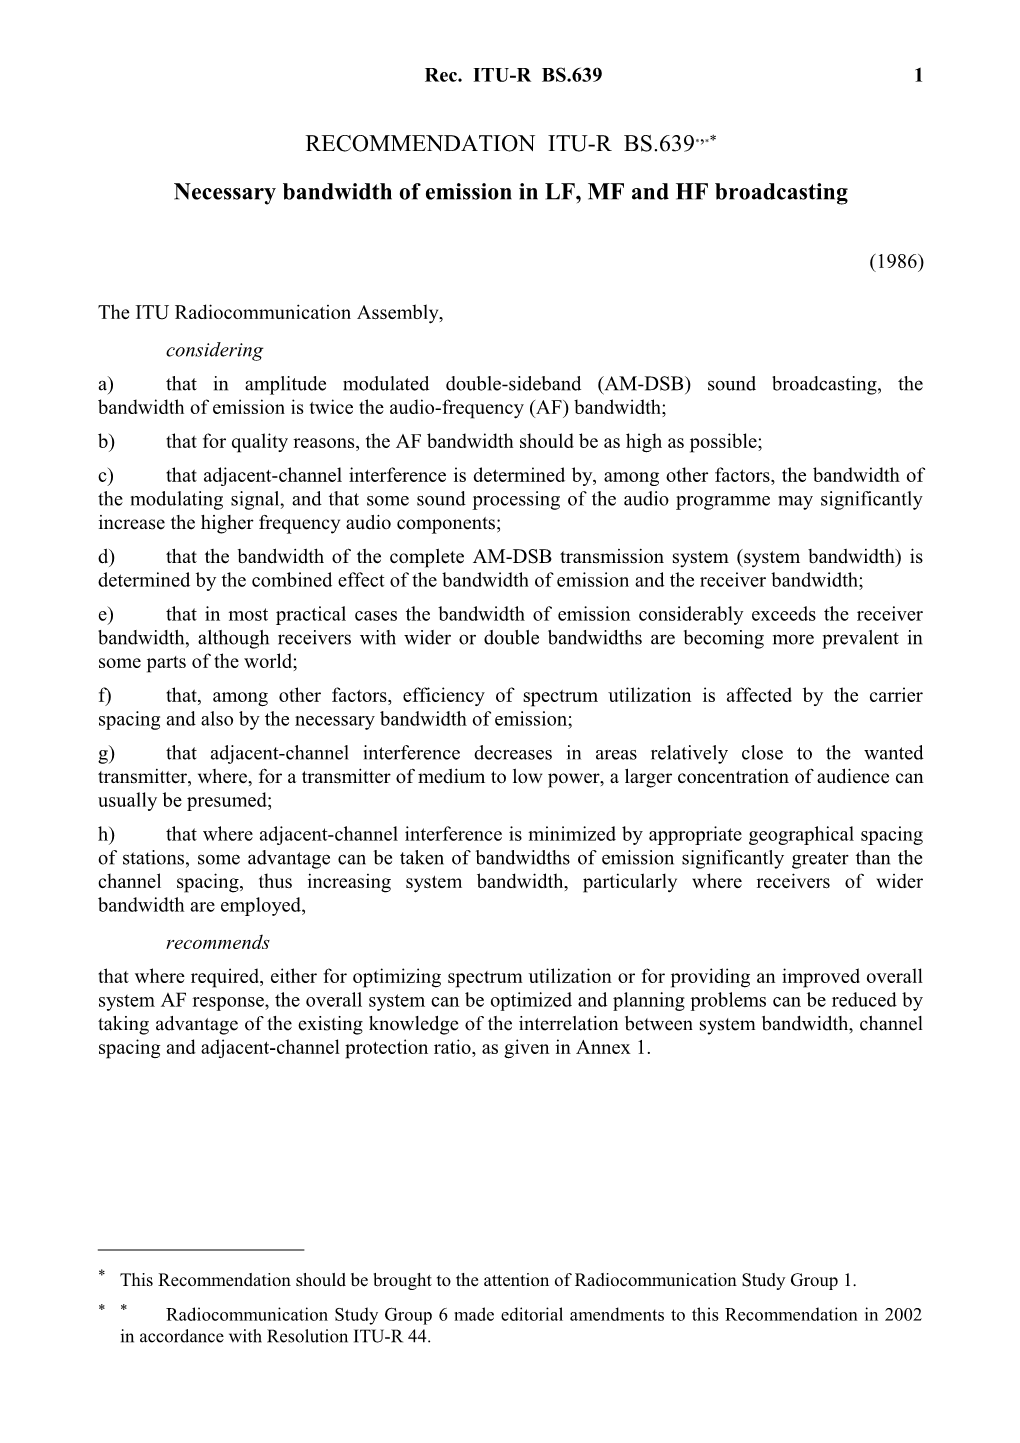 RECOMMENDATION ITU-R BS.639 - Necessary Bandwidth of Emission in LF, MF and HF Broadcasting